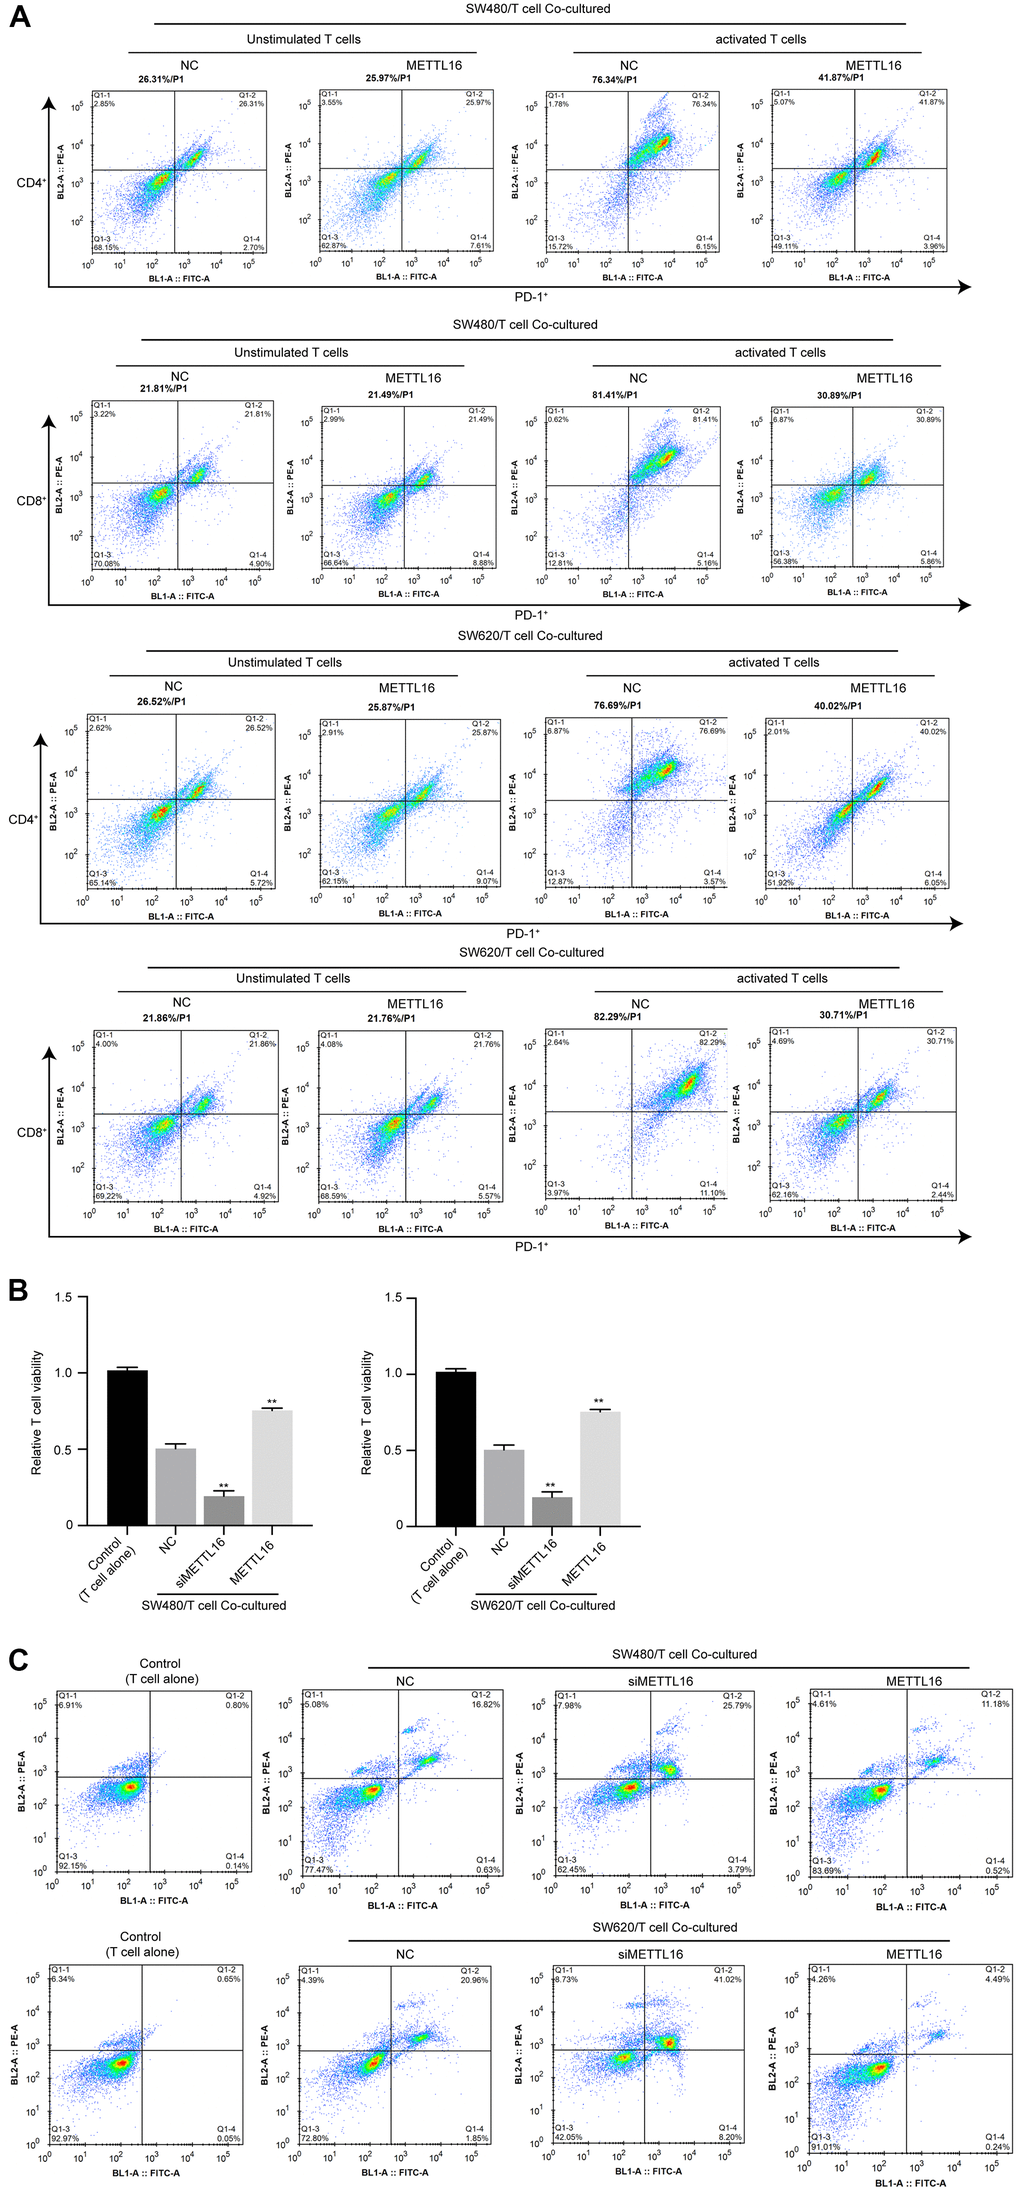 METTL16 modulates immune invasion in a CRC cell/T cell co-culture system. CRC cells were co-cultured with unstimulated or activated T cells. (A) The portion of PD-1+/CD4+ T cells and PD-1+/CD8+ T cells was measured by flow cytometry. (B) Cell viability was assessed by CCK-8 assay. (C) Cell apoptosis was measured by flow cytometry. **p